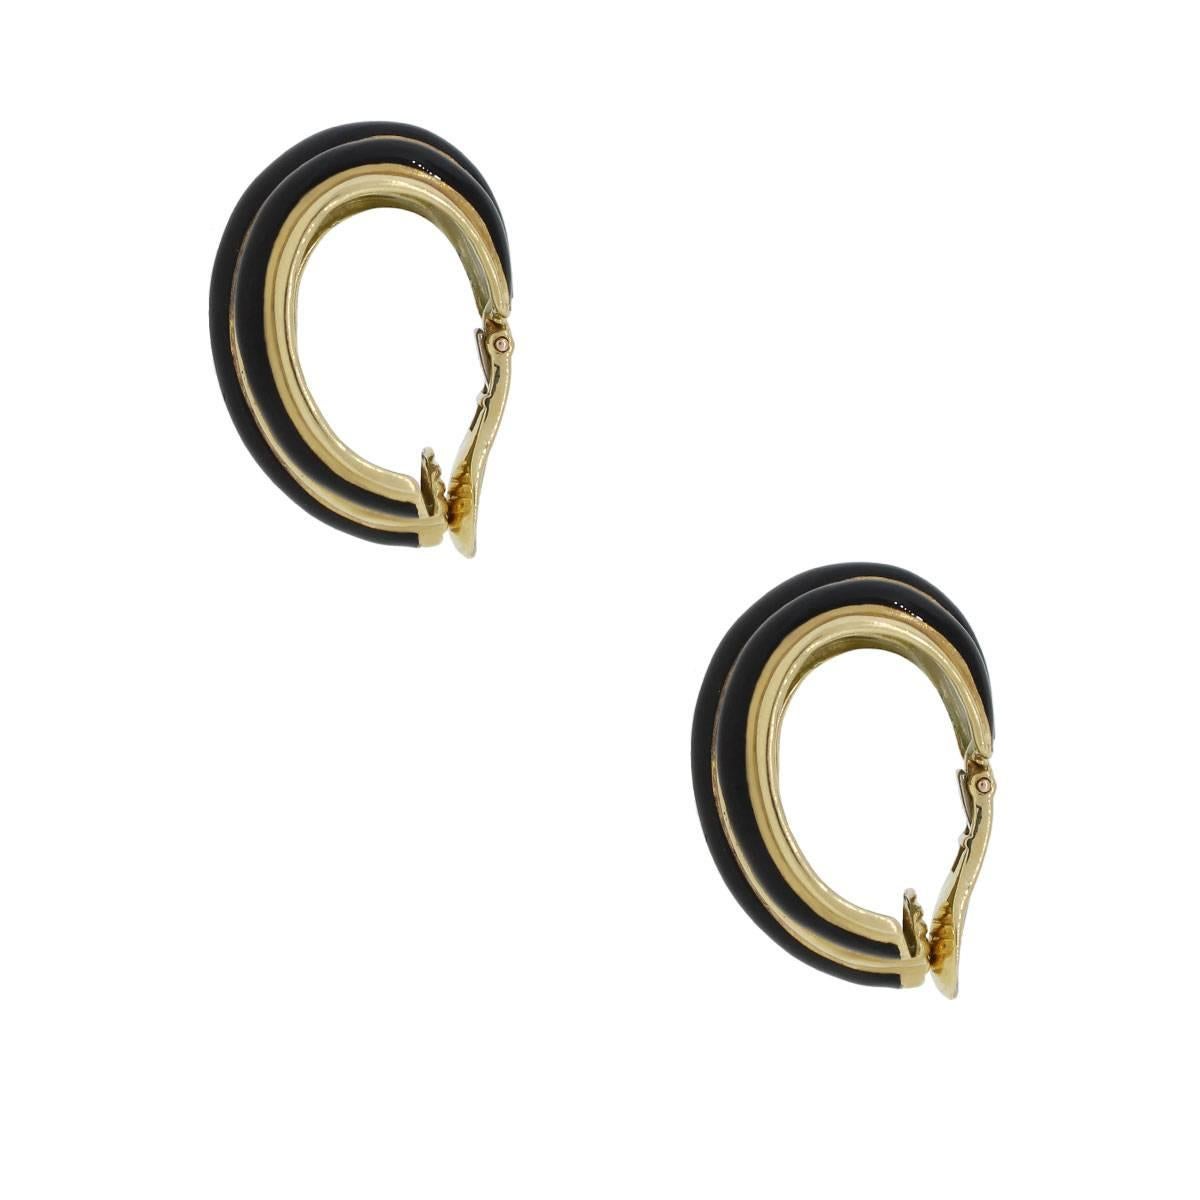 Material: 18k Yellow Gold and Black onyx
Measurements: 1.50